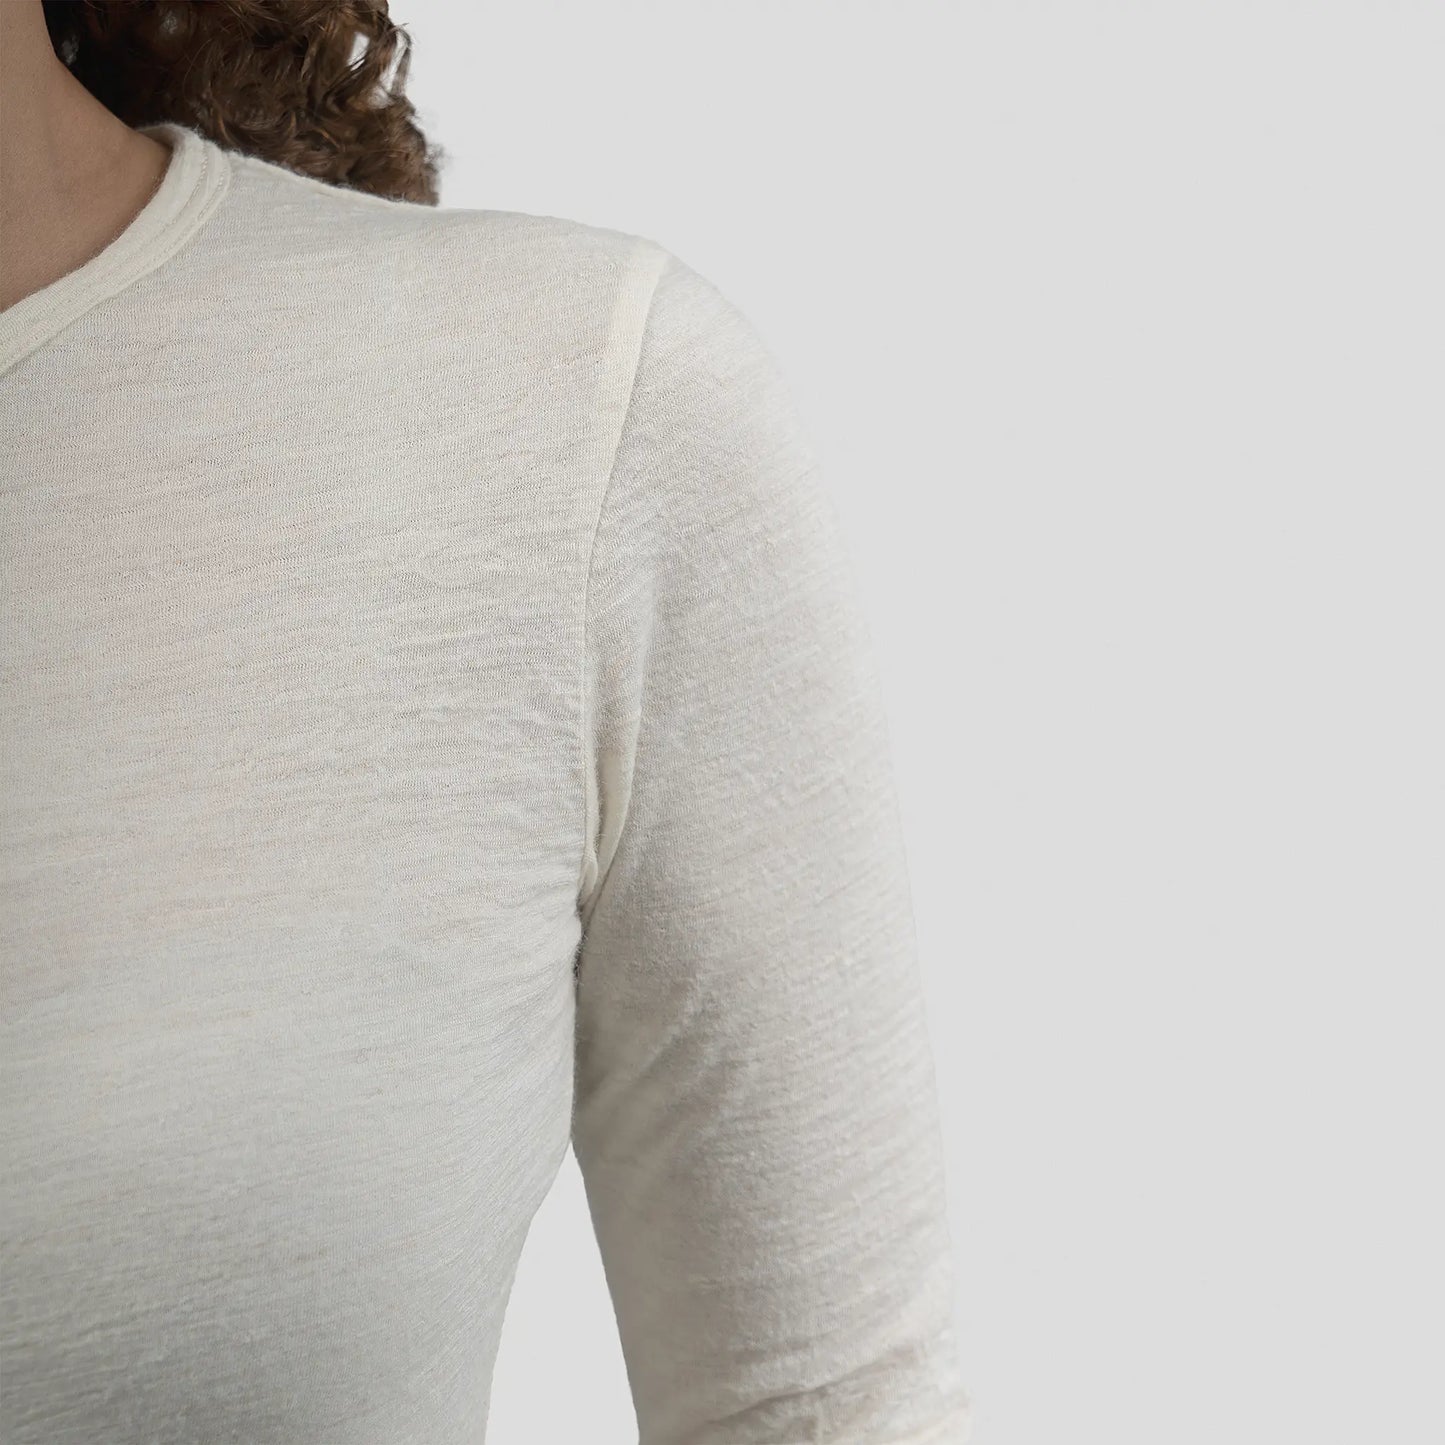 Women's Alpaca Wool Long Sleeve Base Layer: 160 Ultralight color Natural White